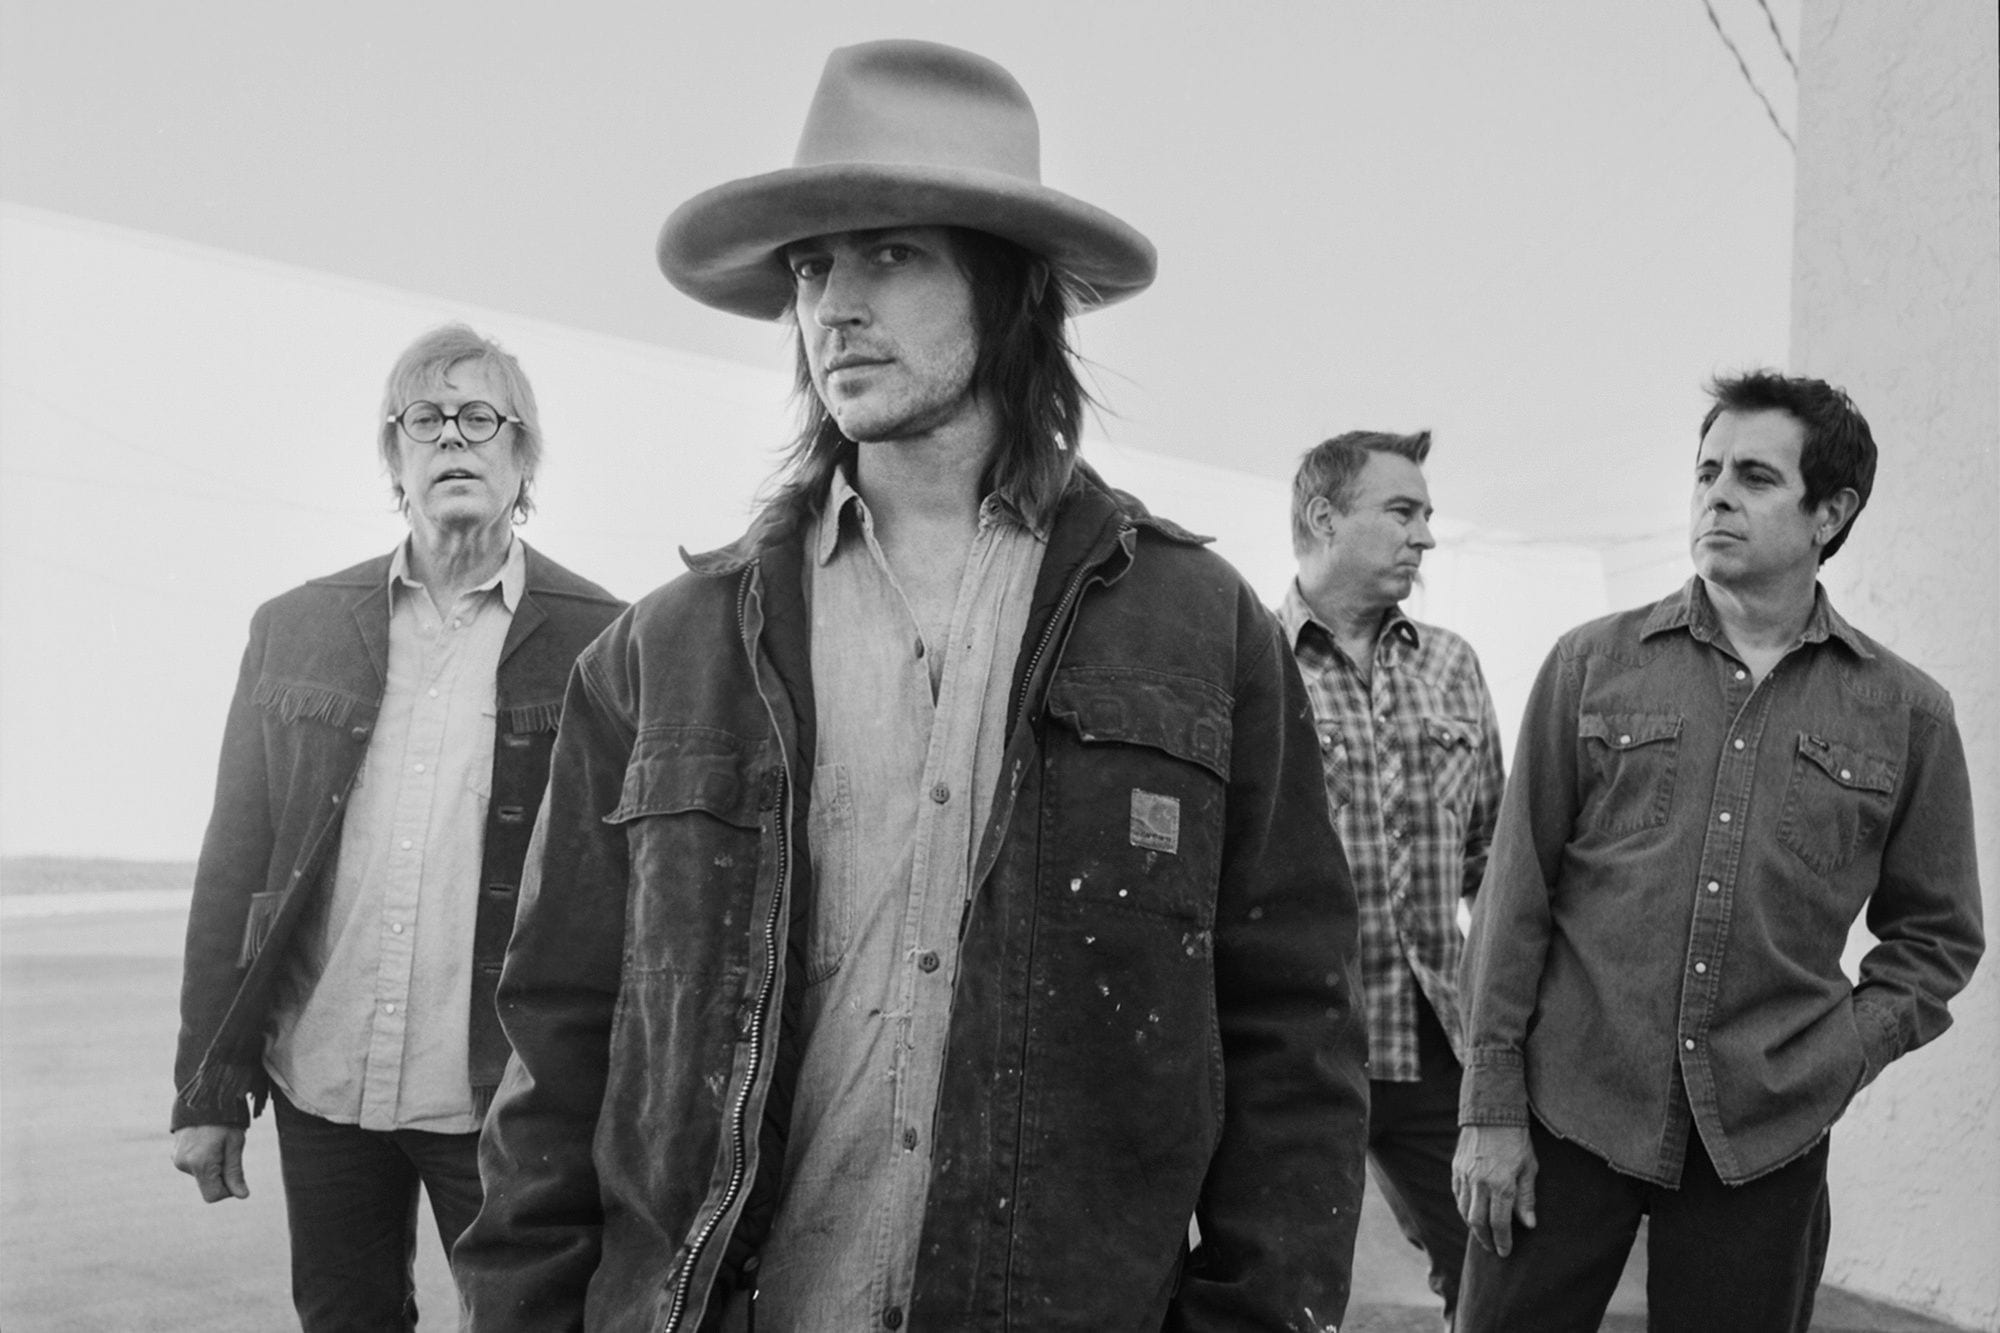 “I Don’t Want This Sullied by These Foul-mouthed Youngsters”: An Interview With Old 97’s